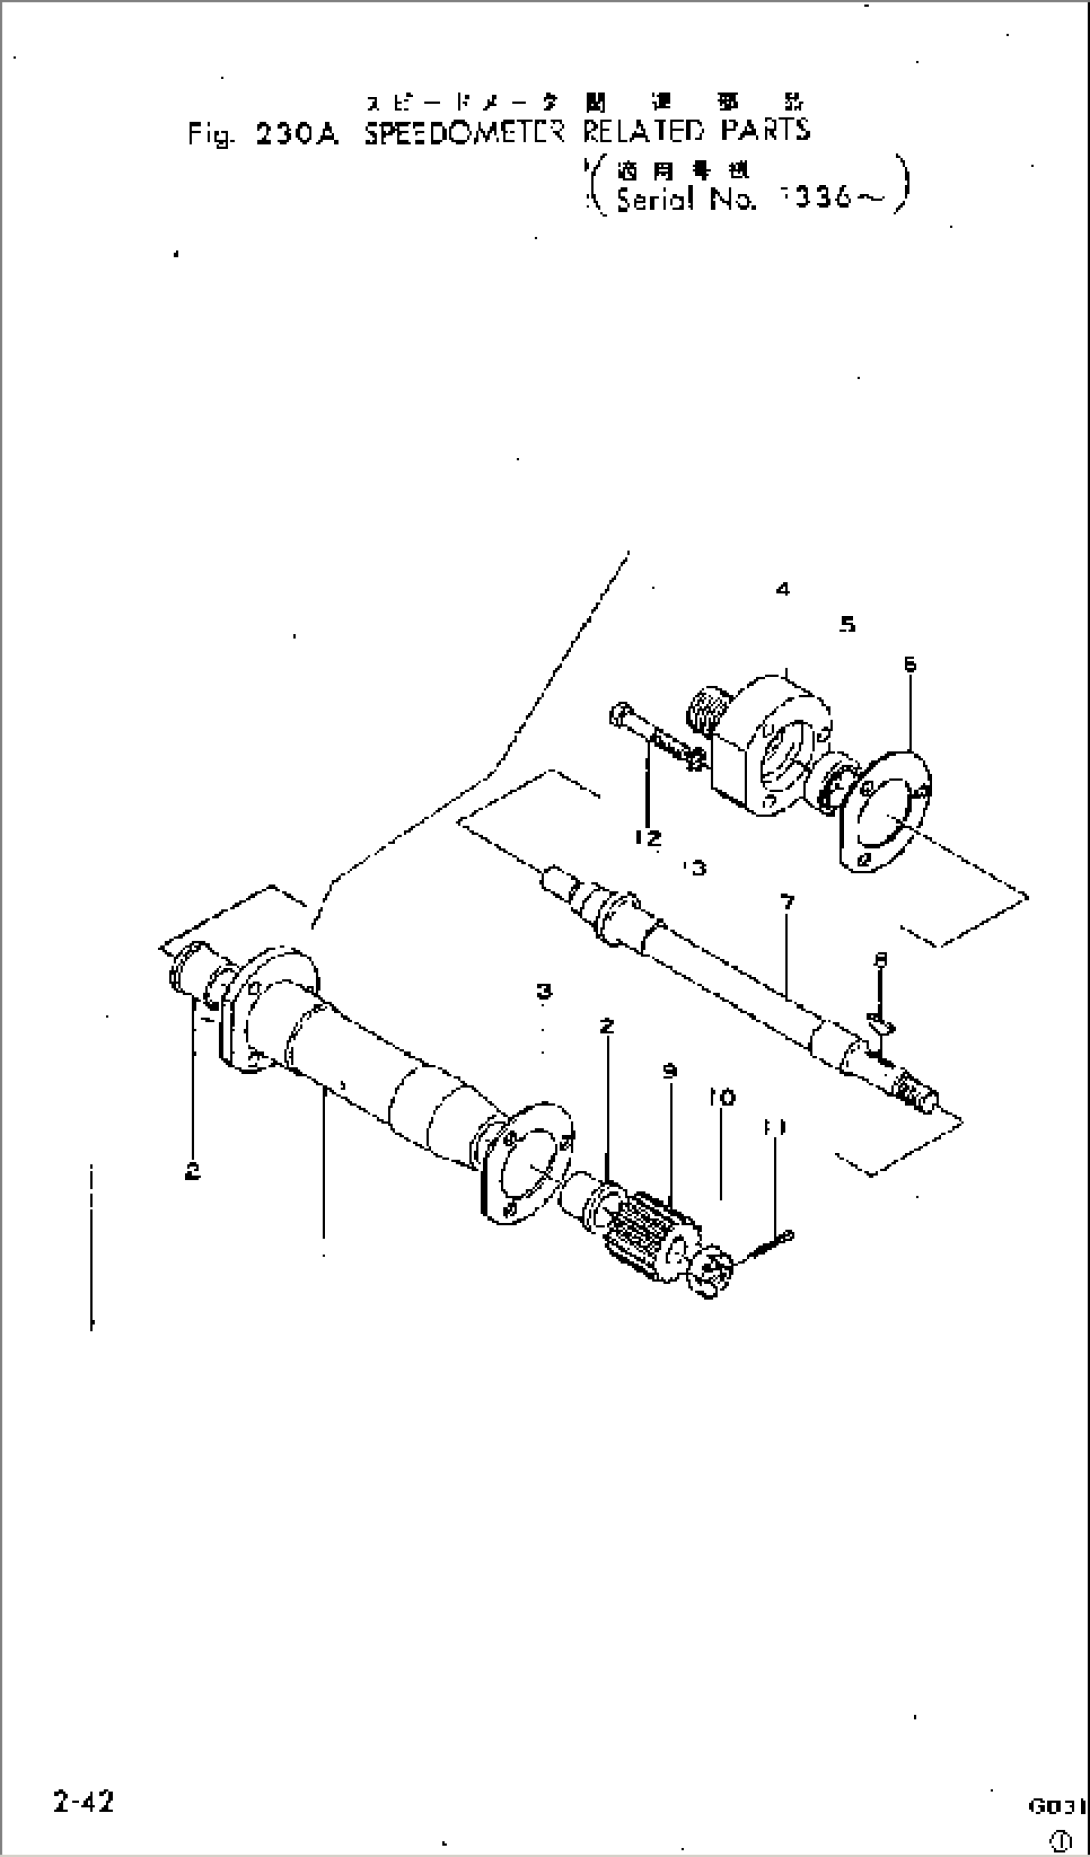 SPEEDOMETER RELATED PARTS(#1336-1499)